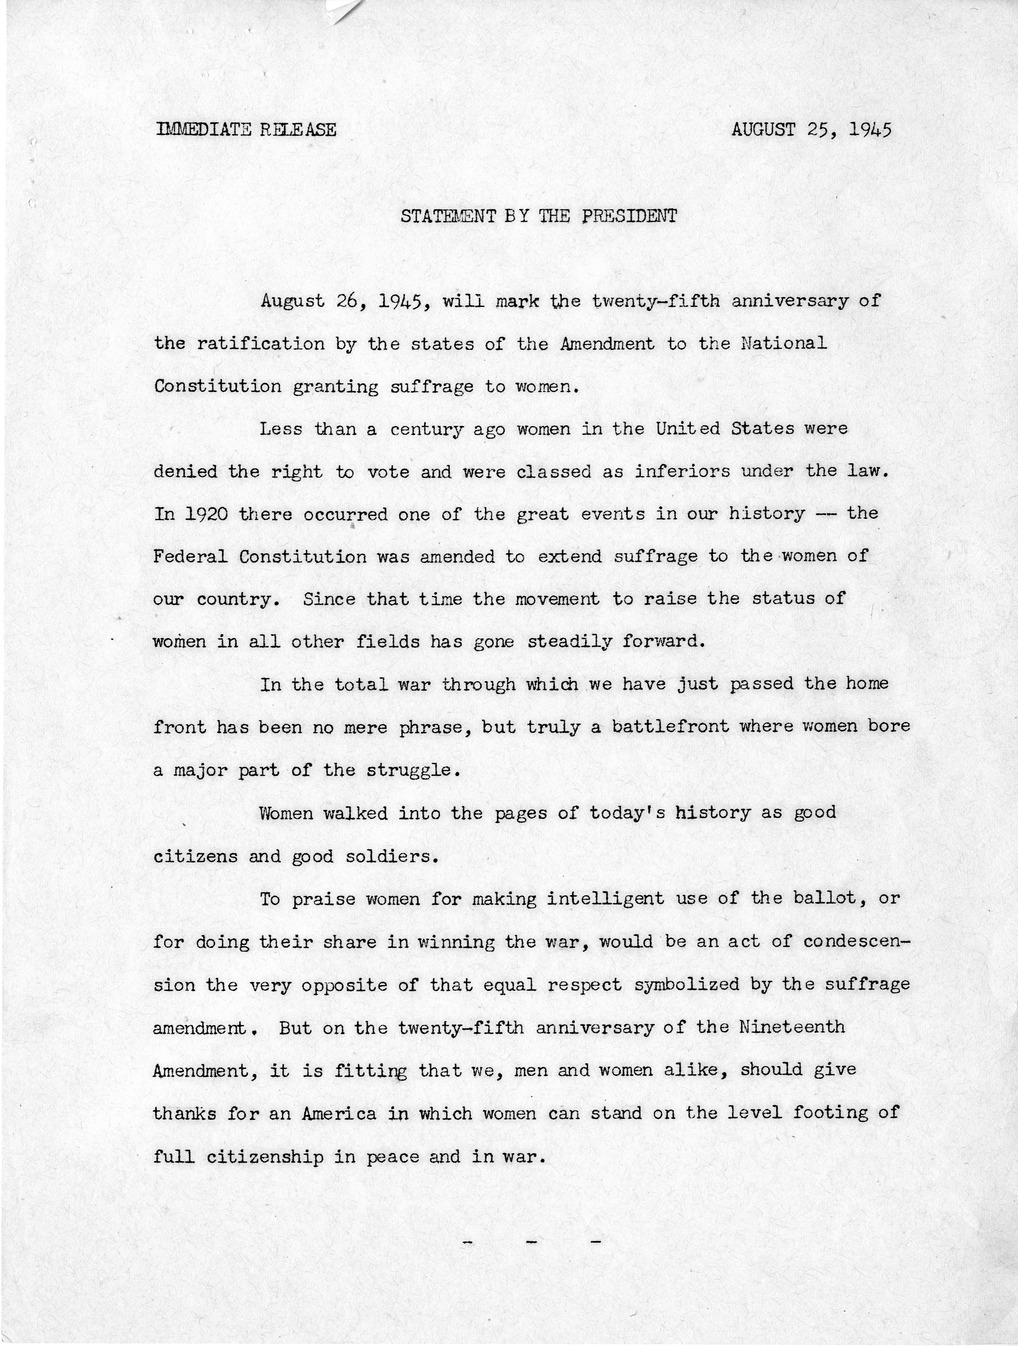 Memorandum from Frederick J. Bailey to M. C. Latta, S.J. Res. 107, Requesting the President to Proclaim November 22, 1945, as Woman's Enfranchisement Day, with Attachments